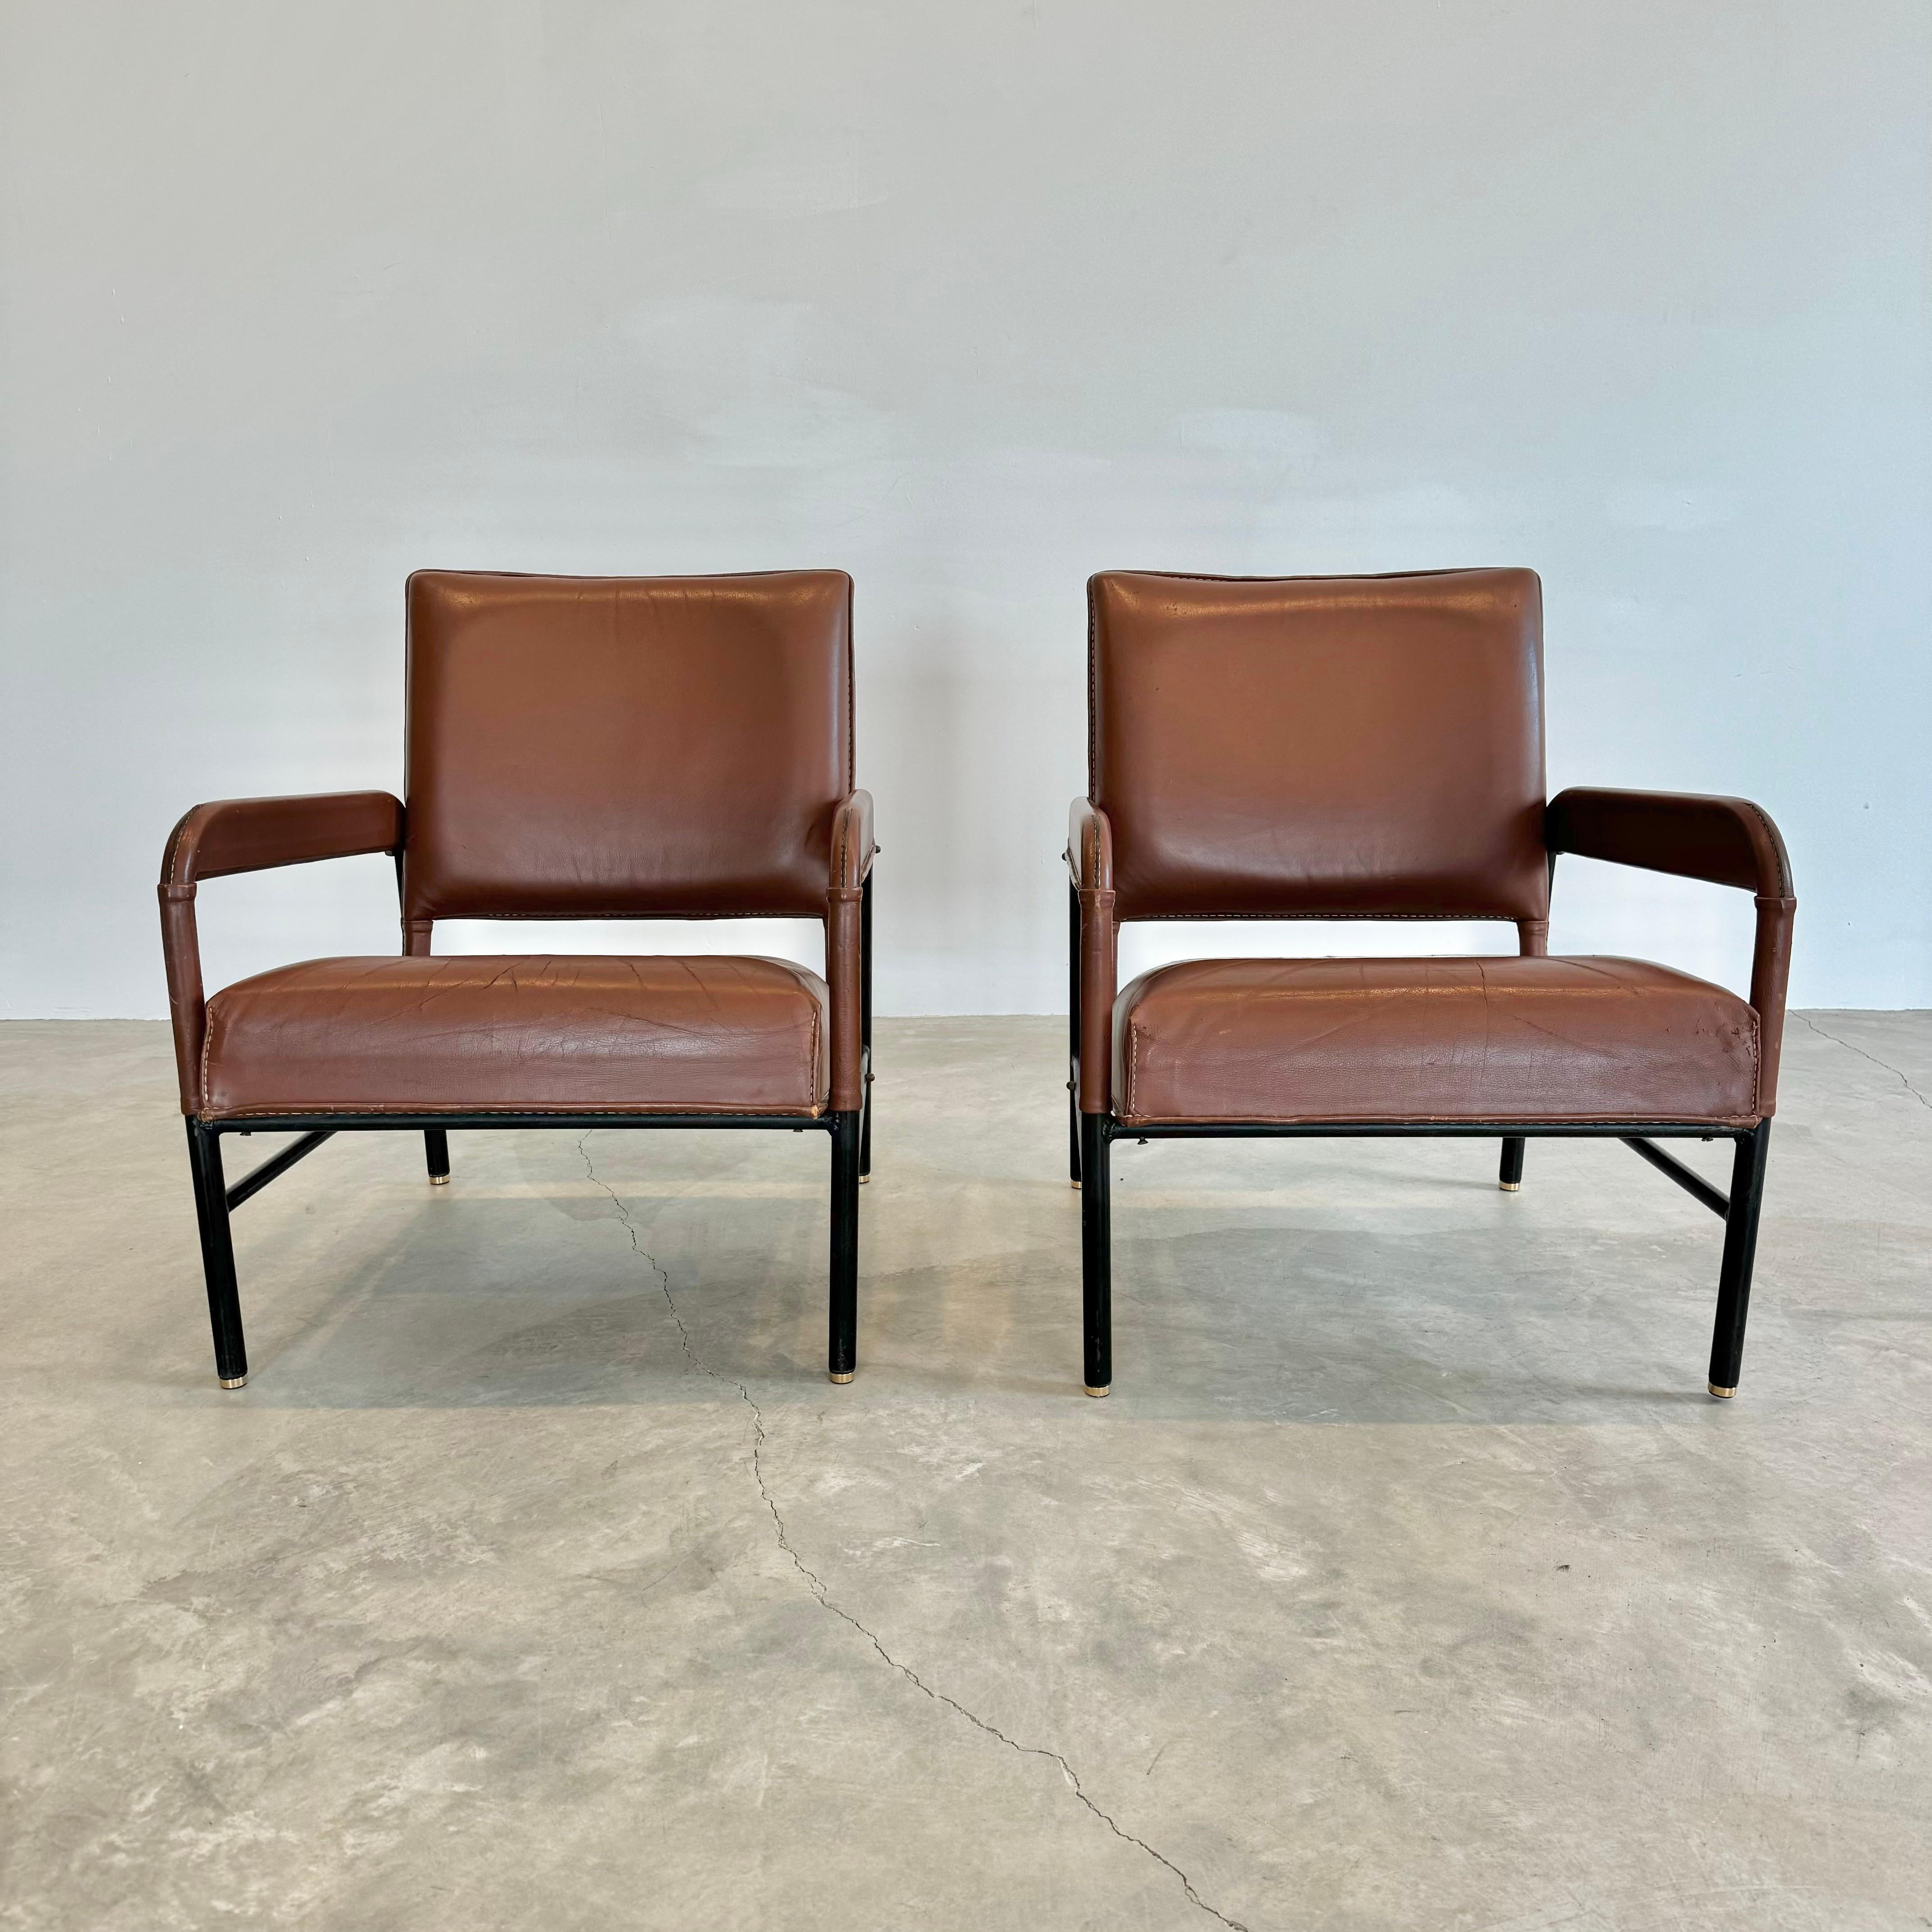 Pair of Saddle Leather and Iron Armchairs by Jacques Adnet, 1950s France For Sale 7